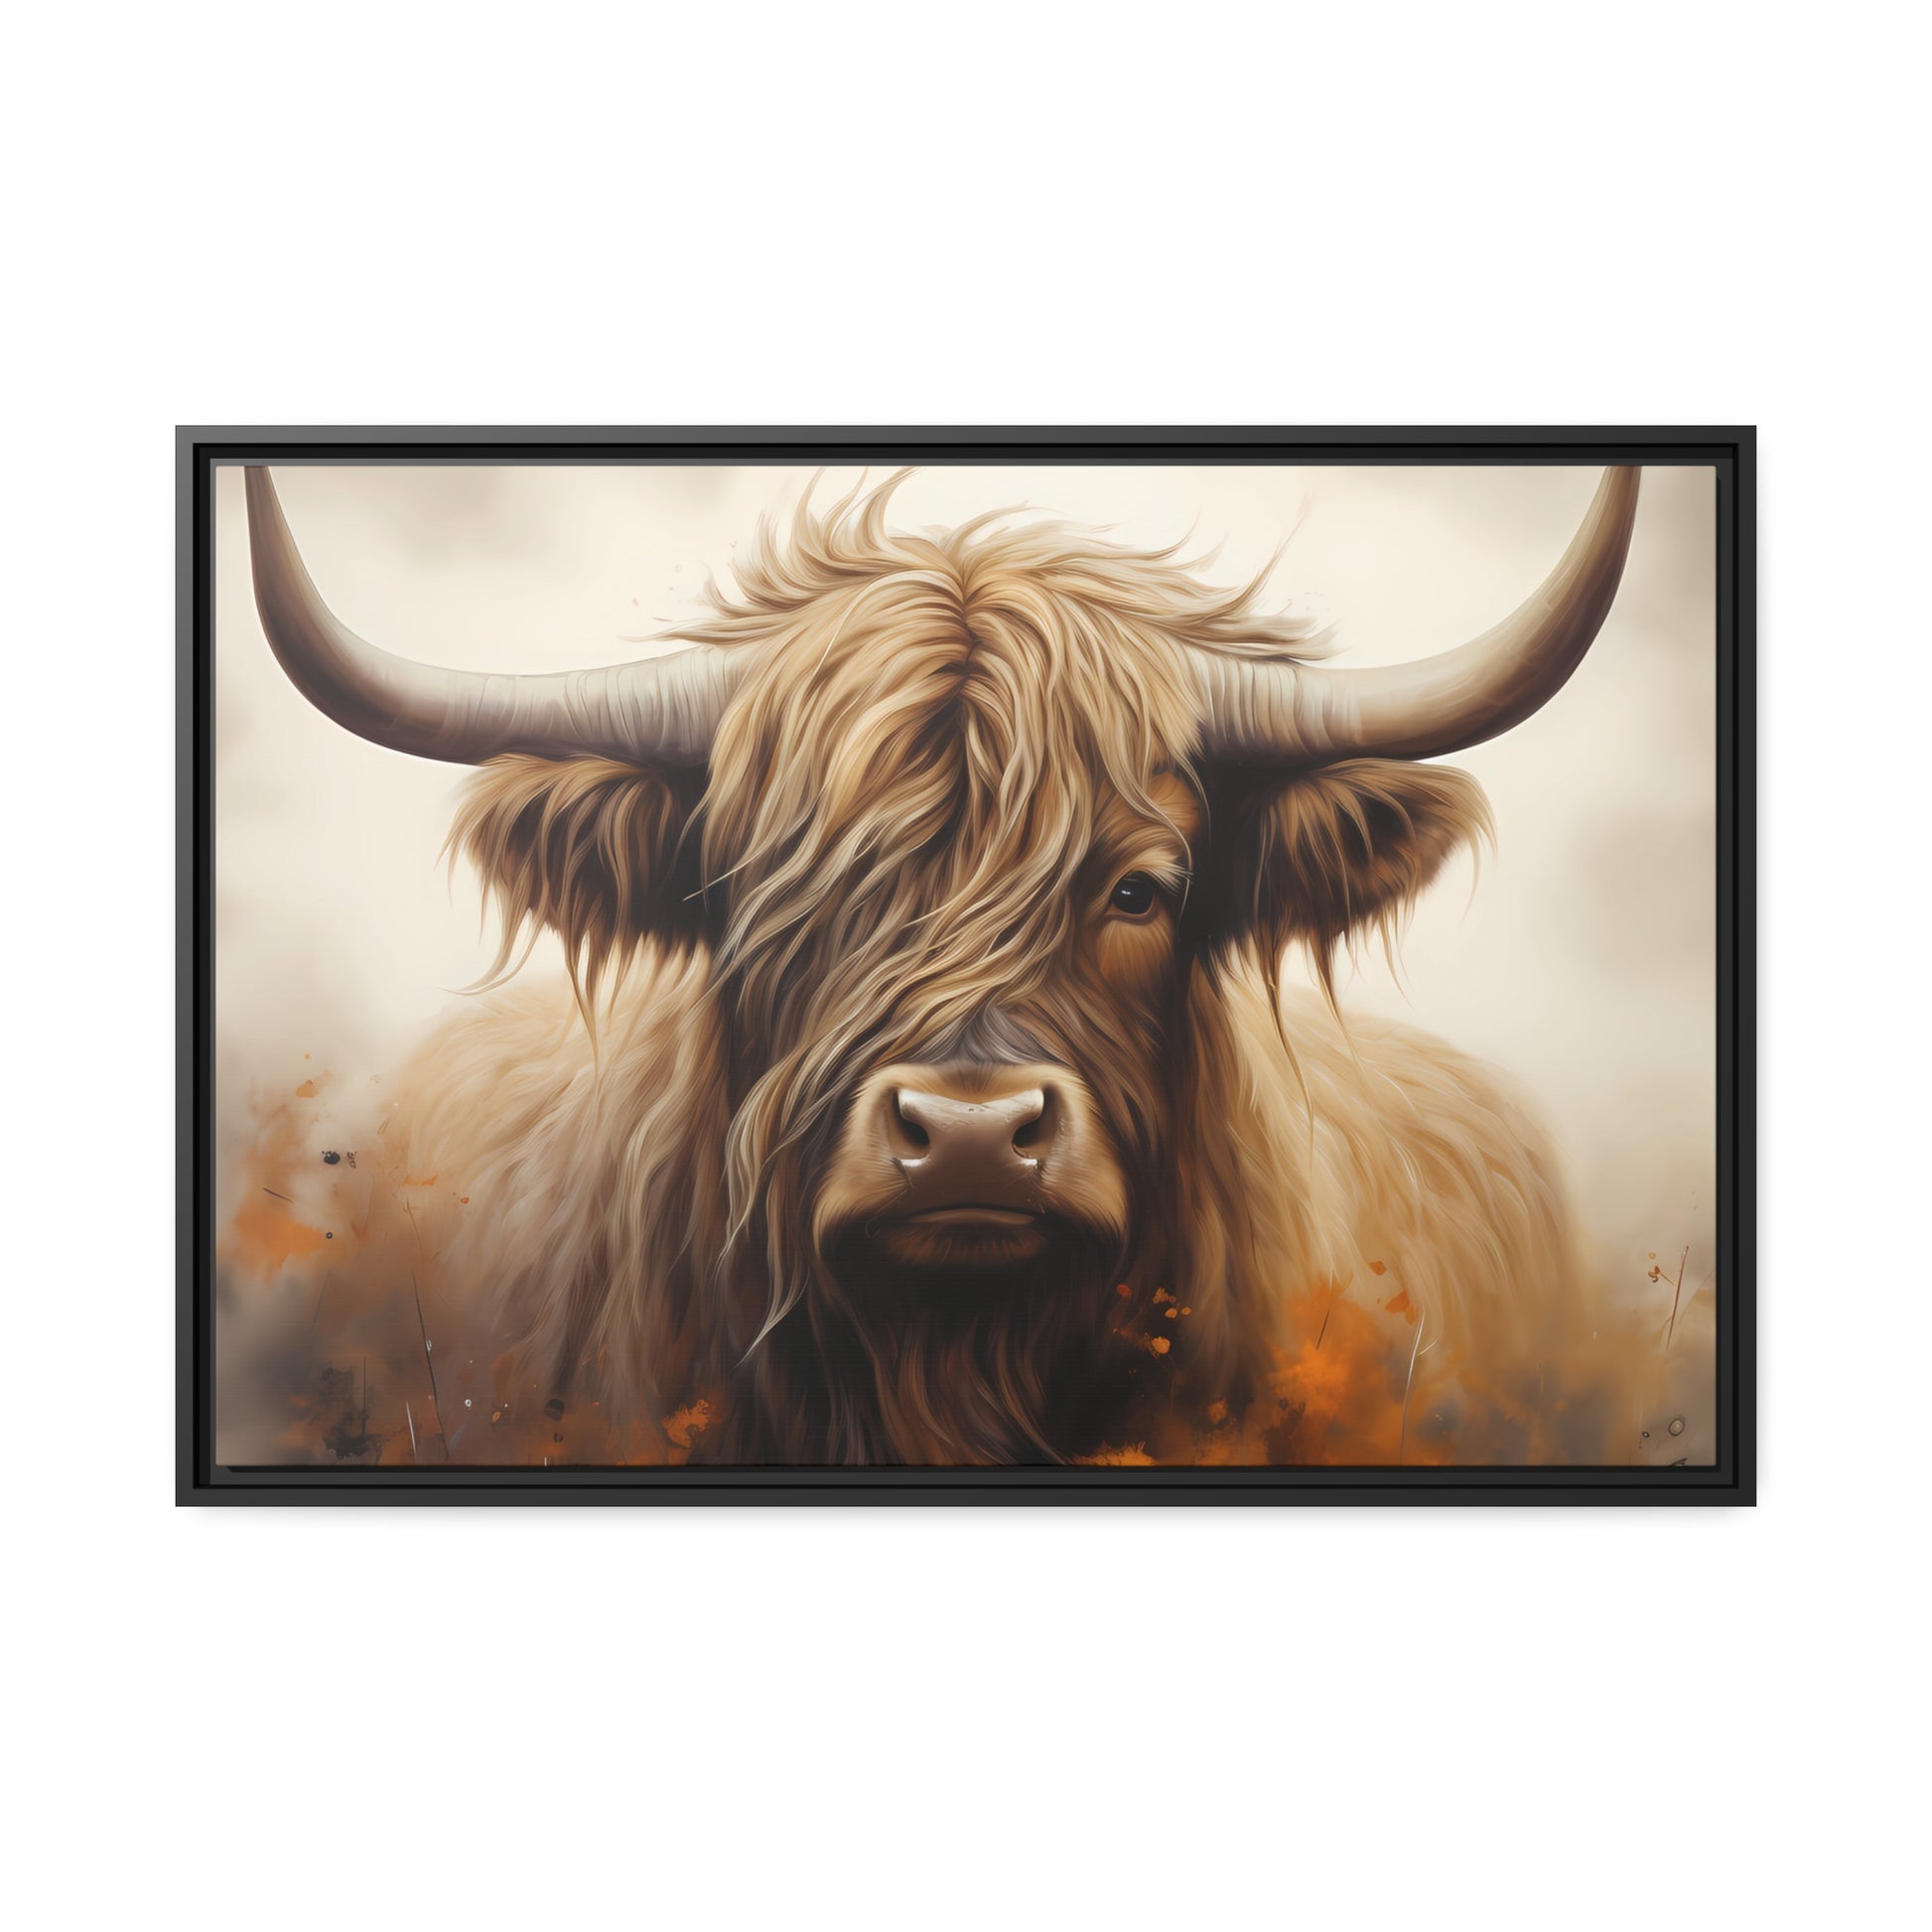 Framed Canvas Artwork Strong Stunning Highlander Bull Warm Fiery Flames Emotional Stylish Bull Staring Into The Viewer Captivating Highly Detailed Painting Style Perfect To Warm Up A Homestead Or Country Home